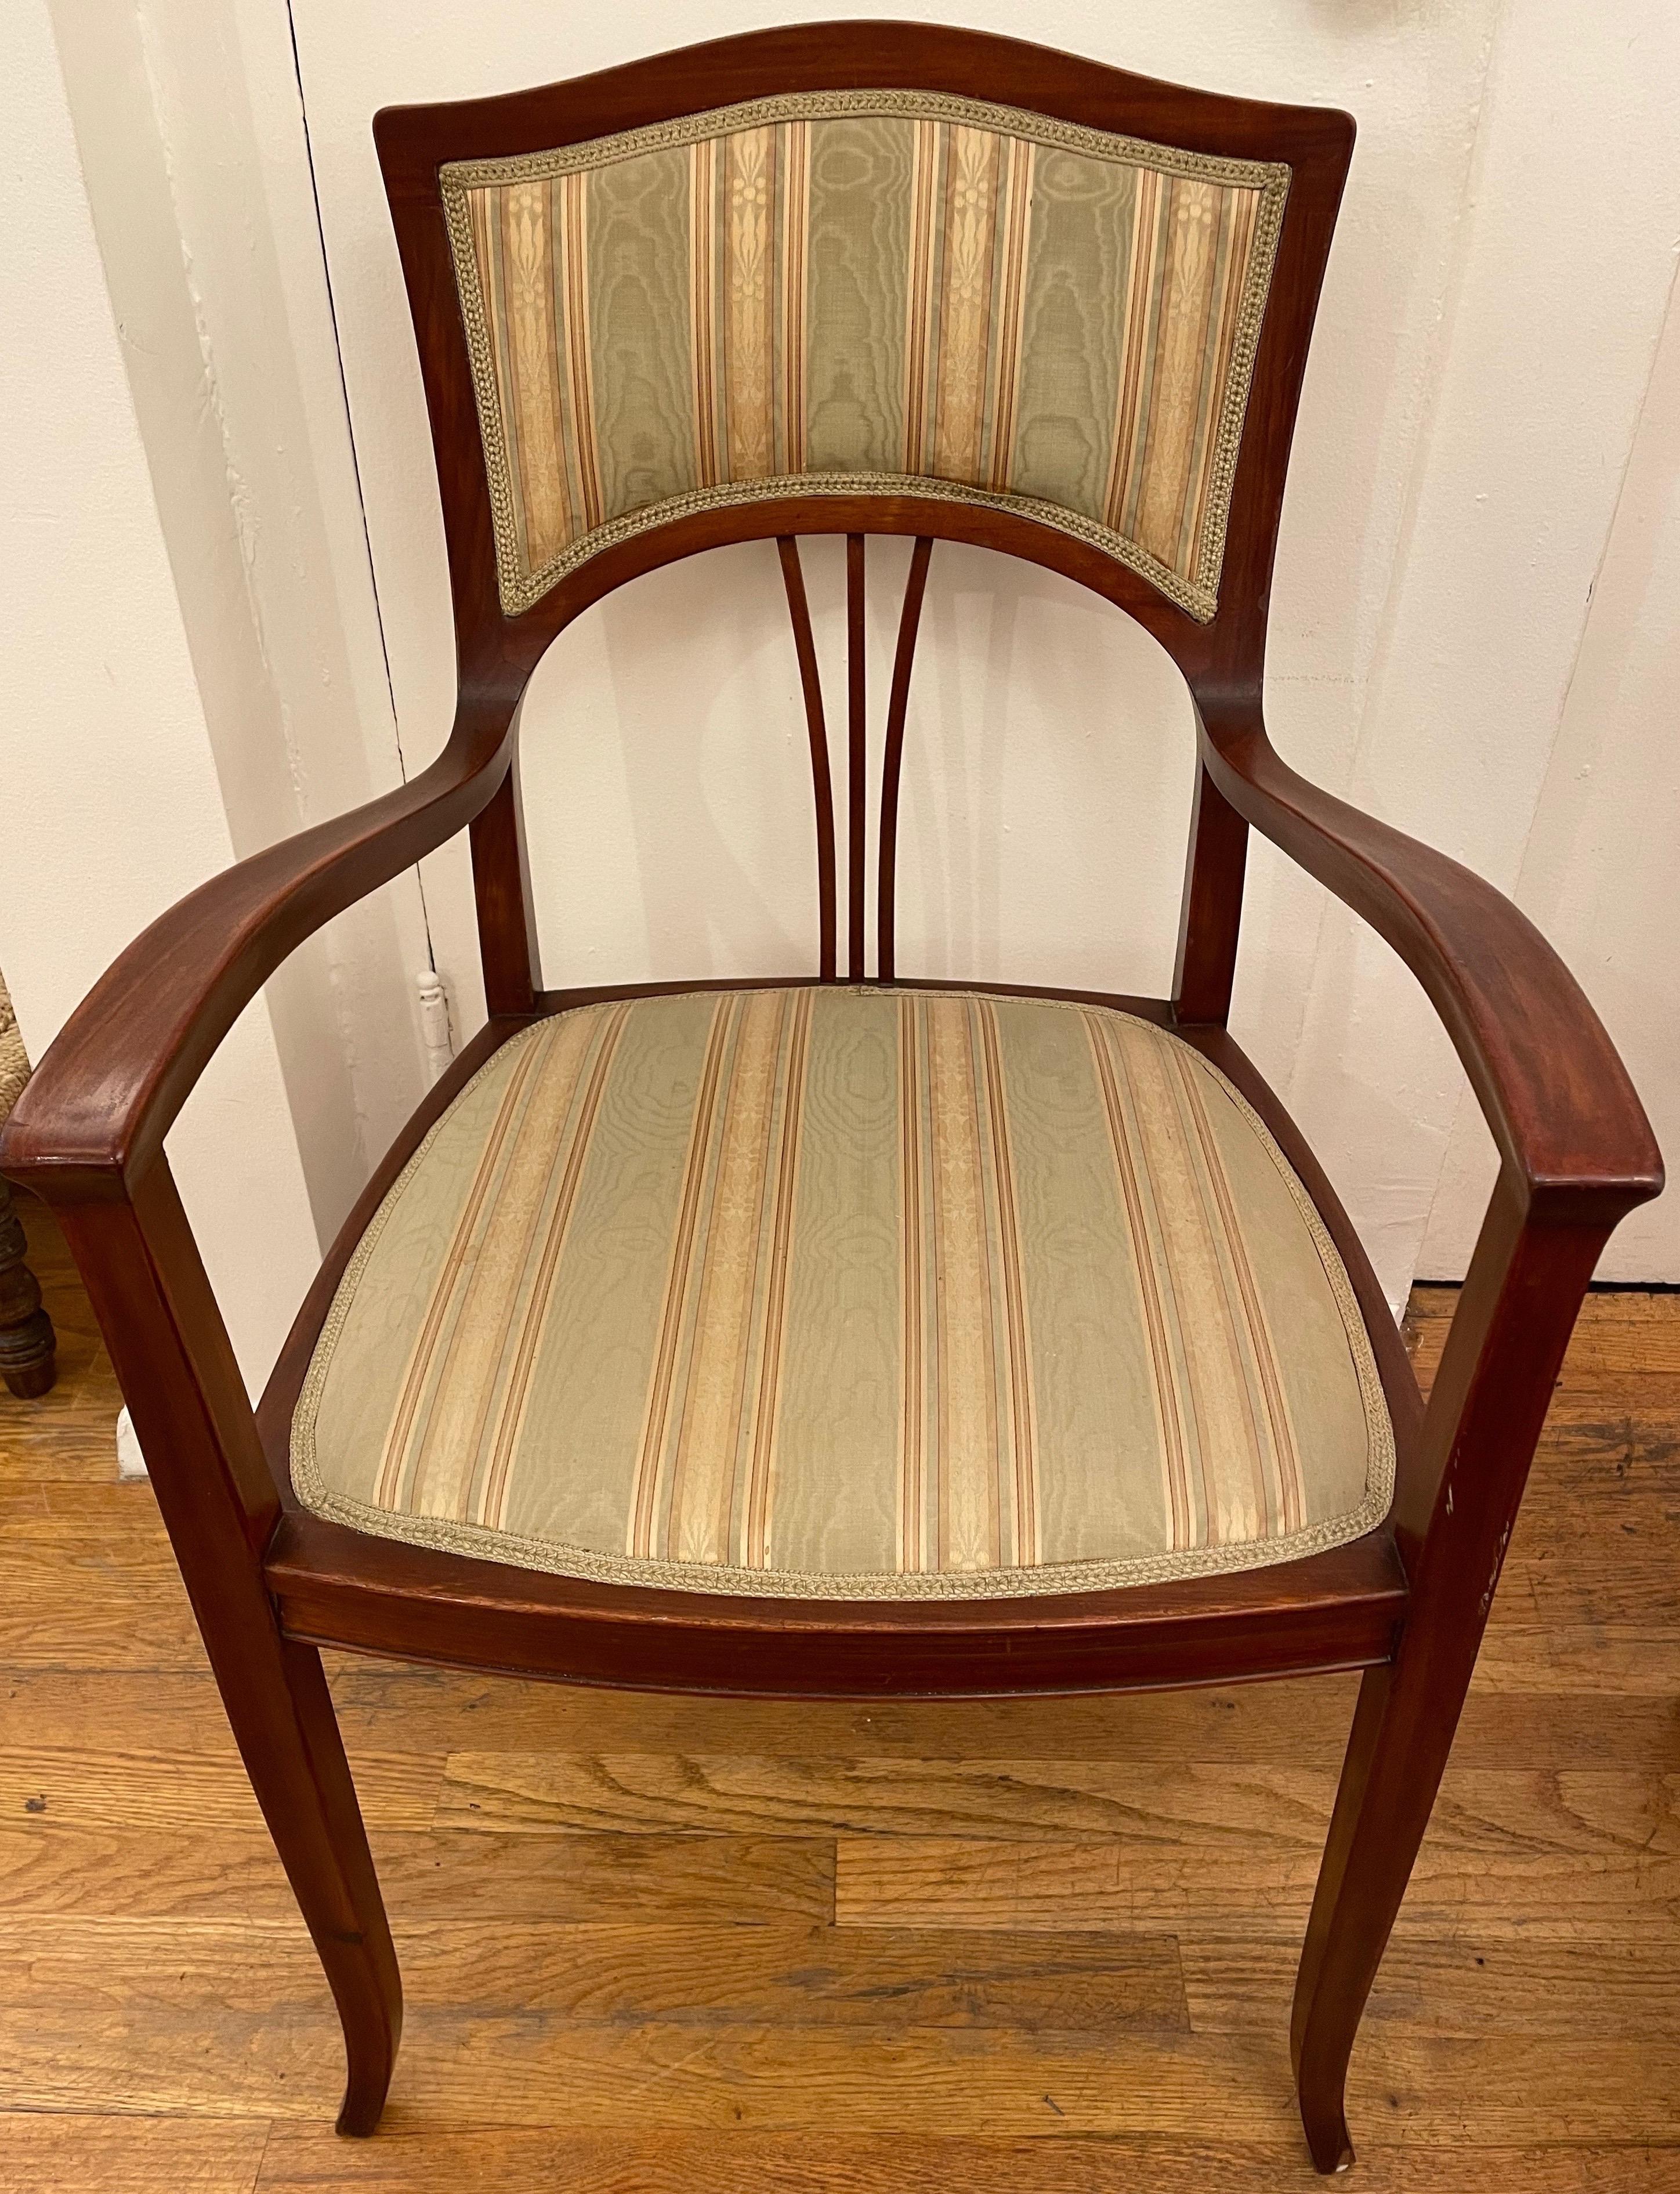 Hand-Crafted Pair of Art Nouveau Armchairs from Sweden, circa 1900 For Sale